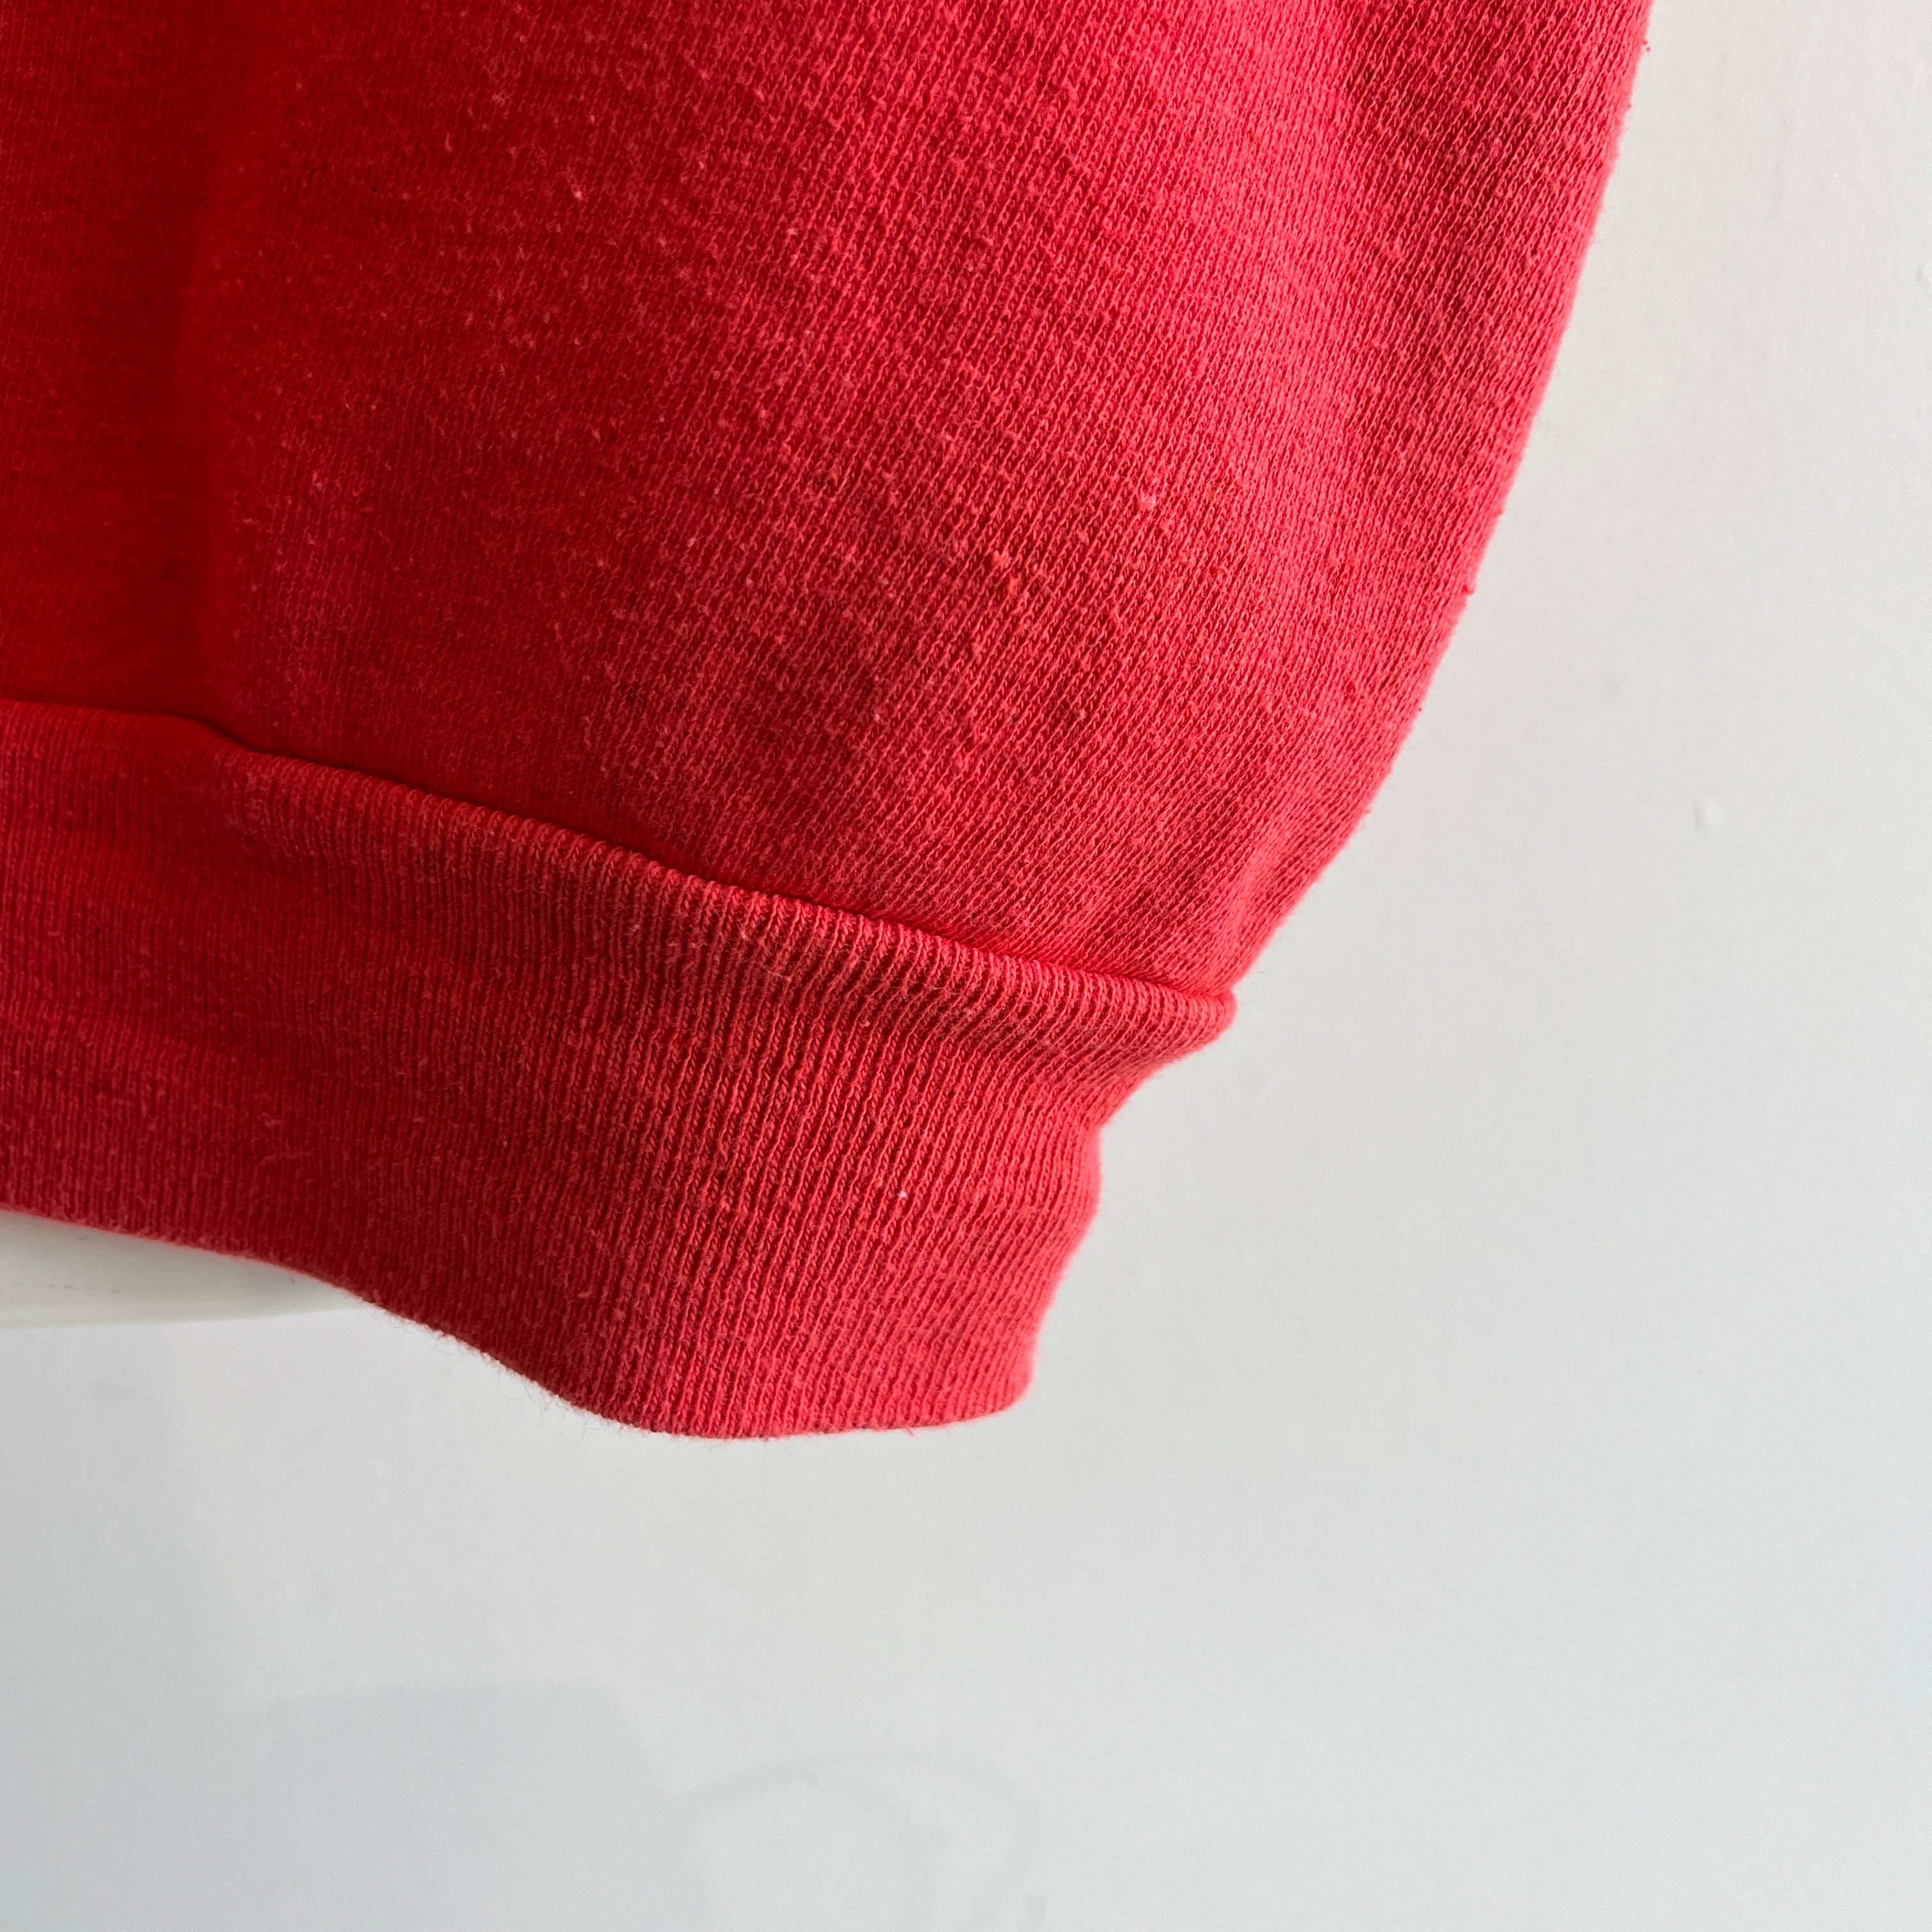 1980s Structured Mostly Cotton Faded Red Sweatshirt Warm up Vest - YES PLEASE!